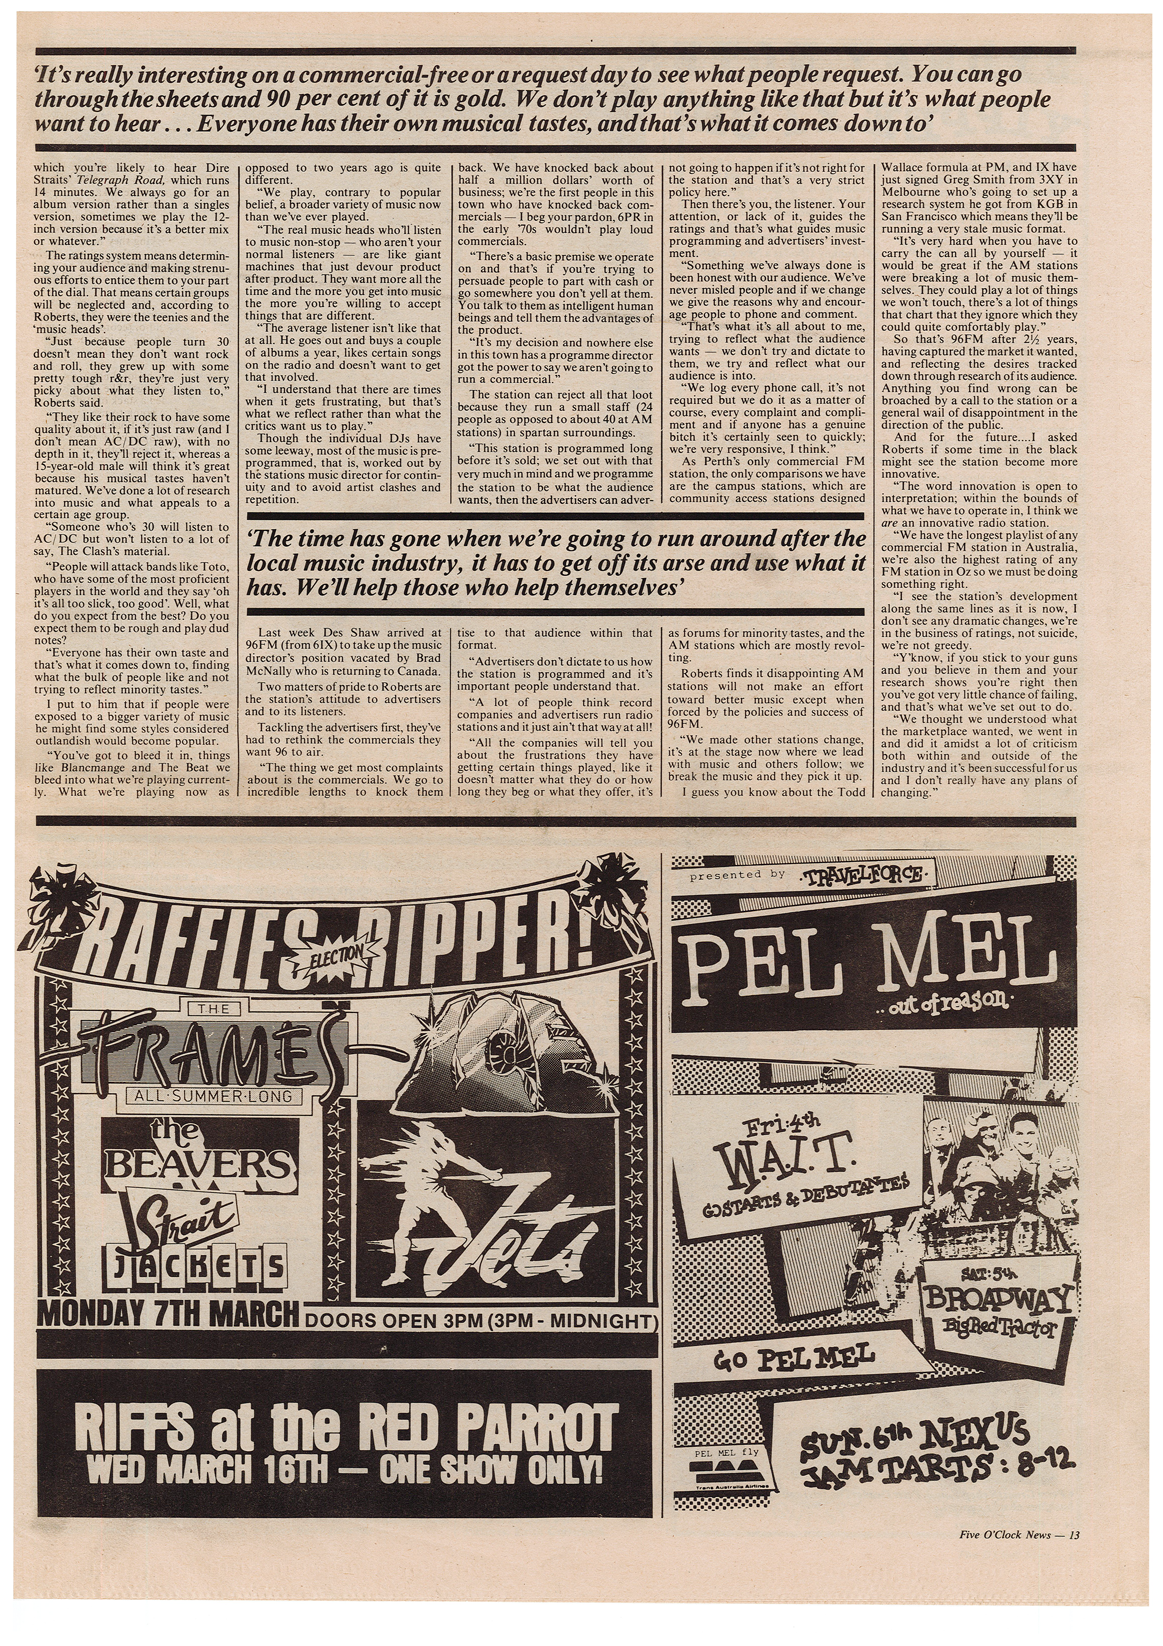 1983.xx.xx - Whats happened to 96FM - Page 13 - UNKNOWN PUB.png